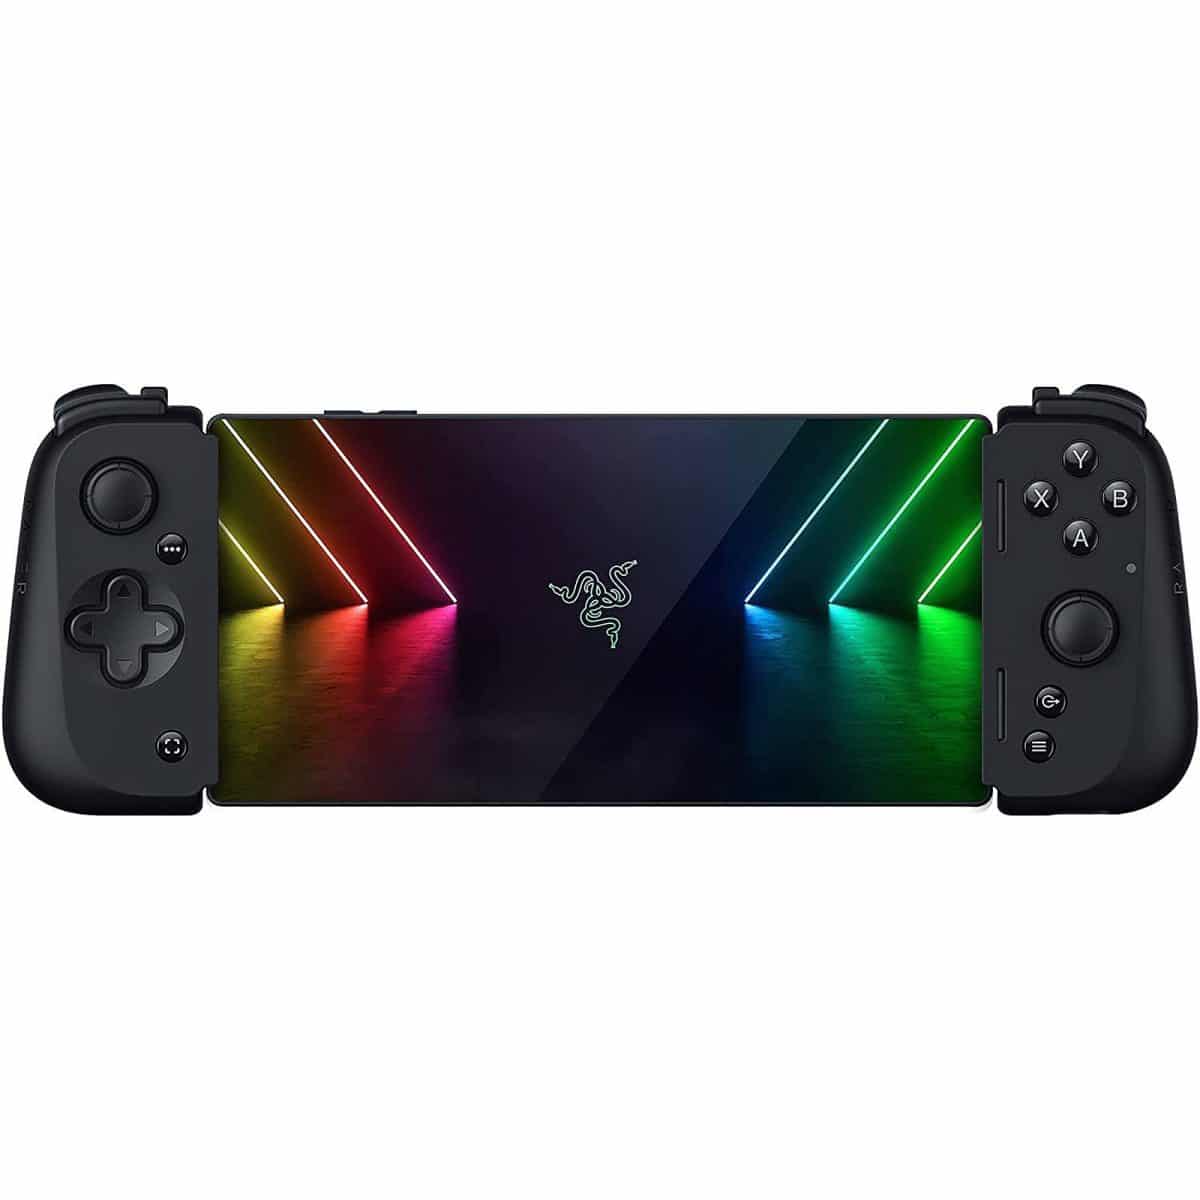 Razer KISHI V2 For ADROID Gaming Controller - Universal fit - Stream PC